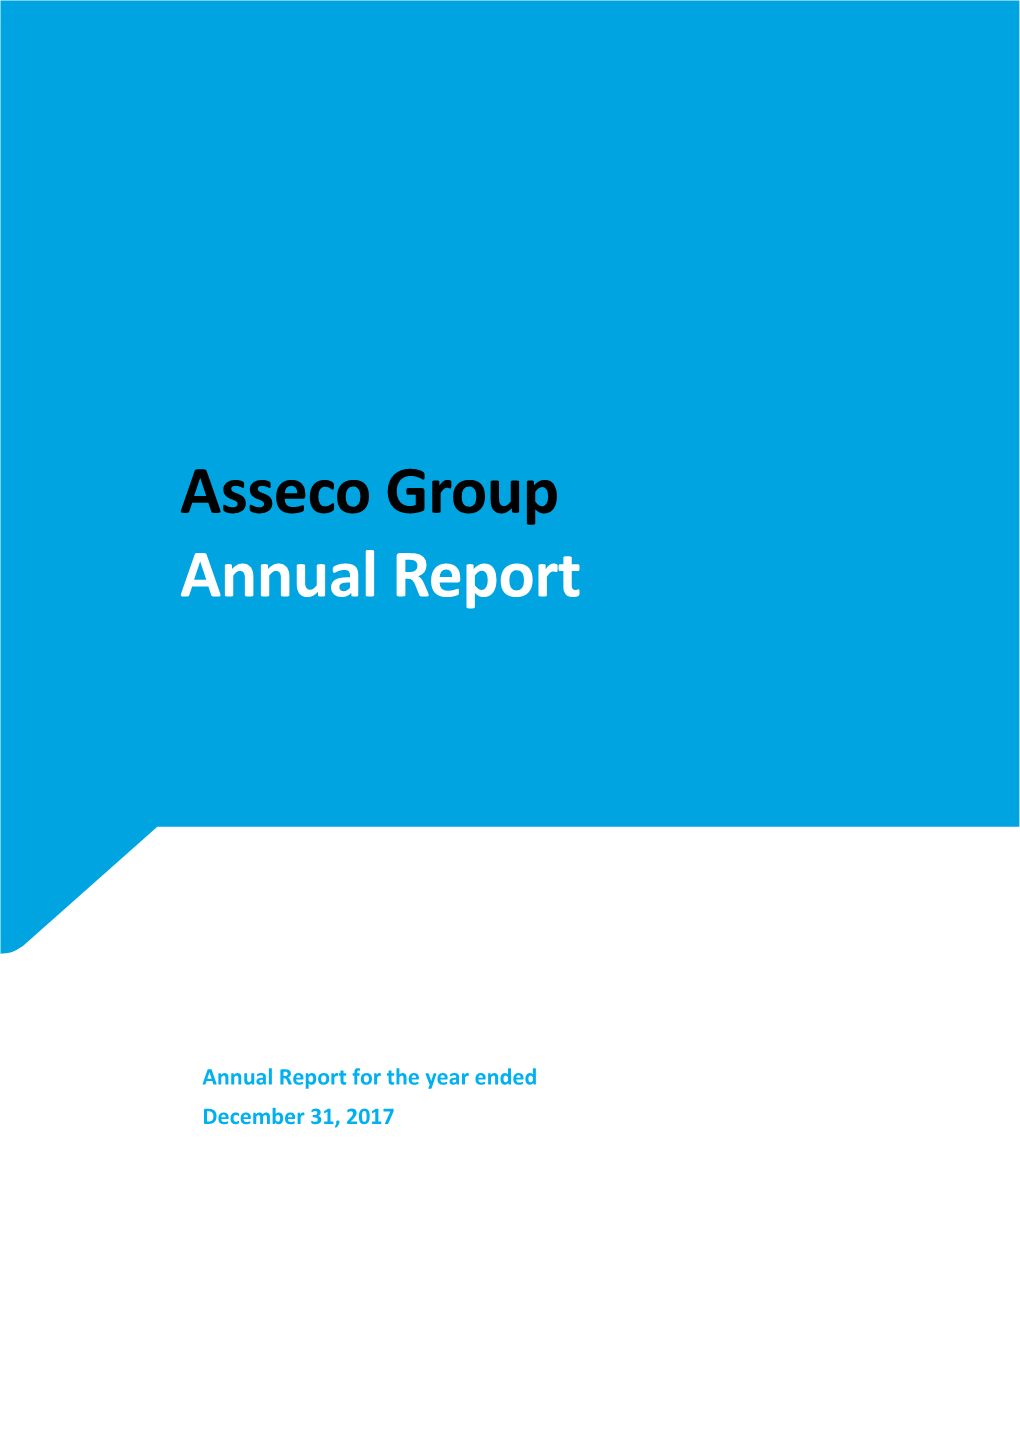 Management Board's Discussion of Asseco